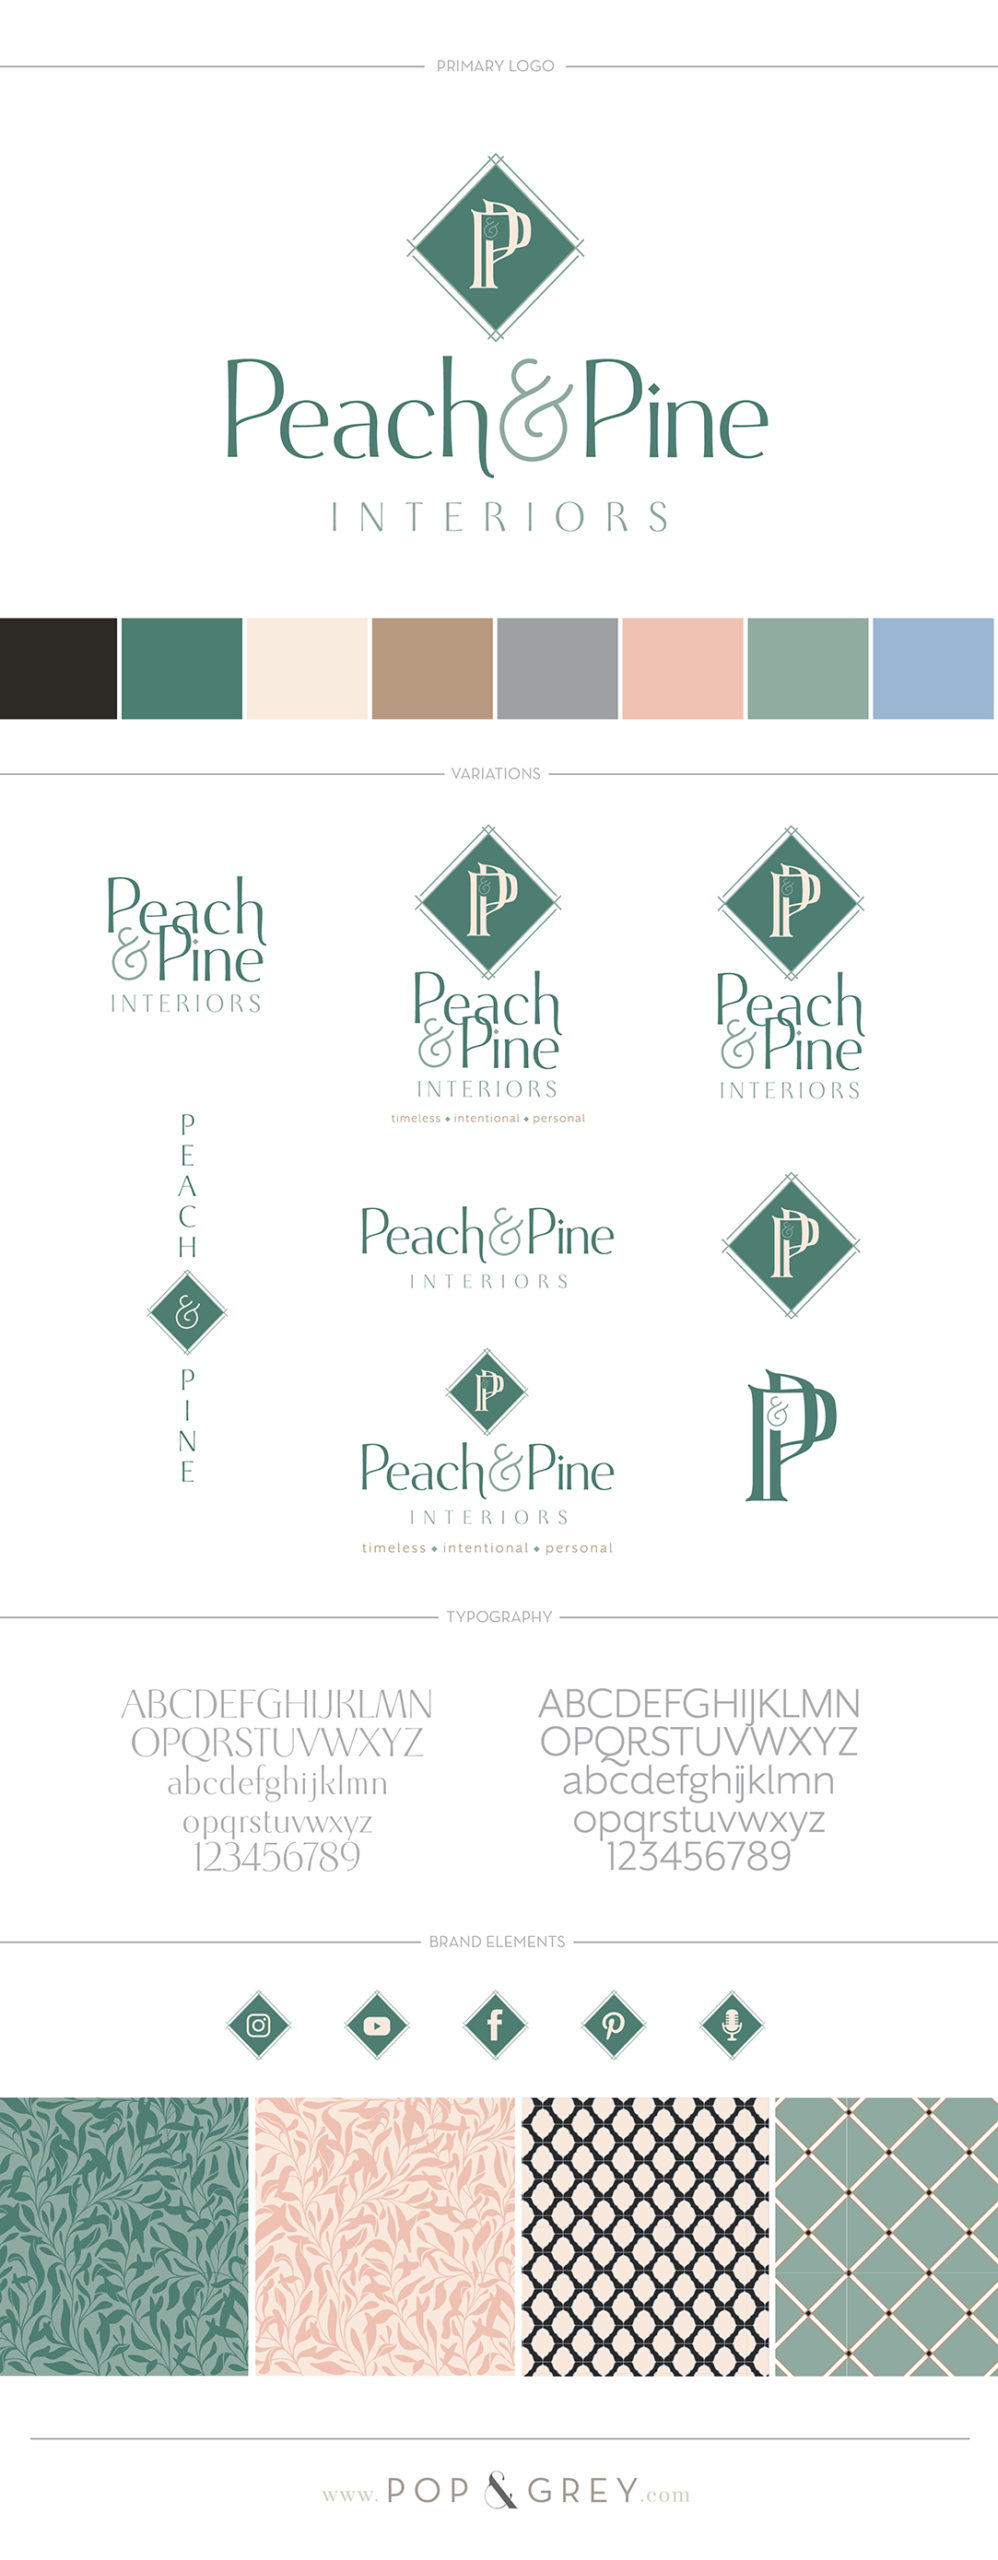 peach and pine interiors brand design by pop and grey